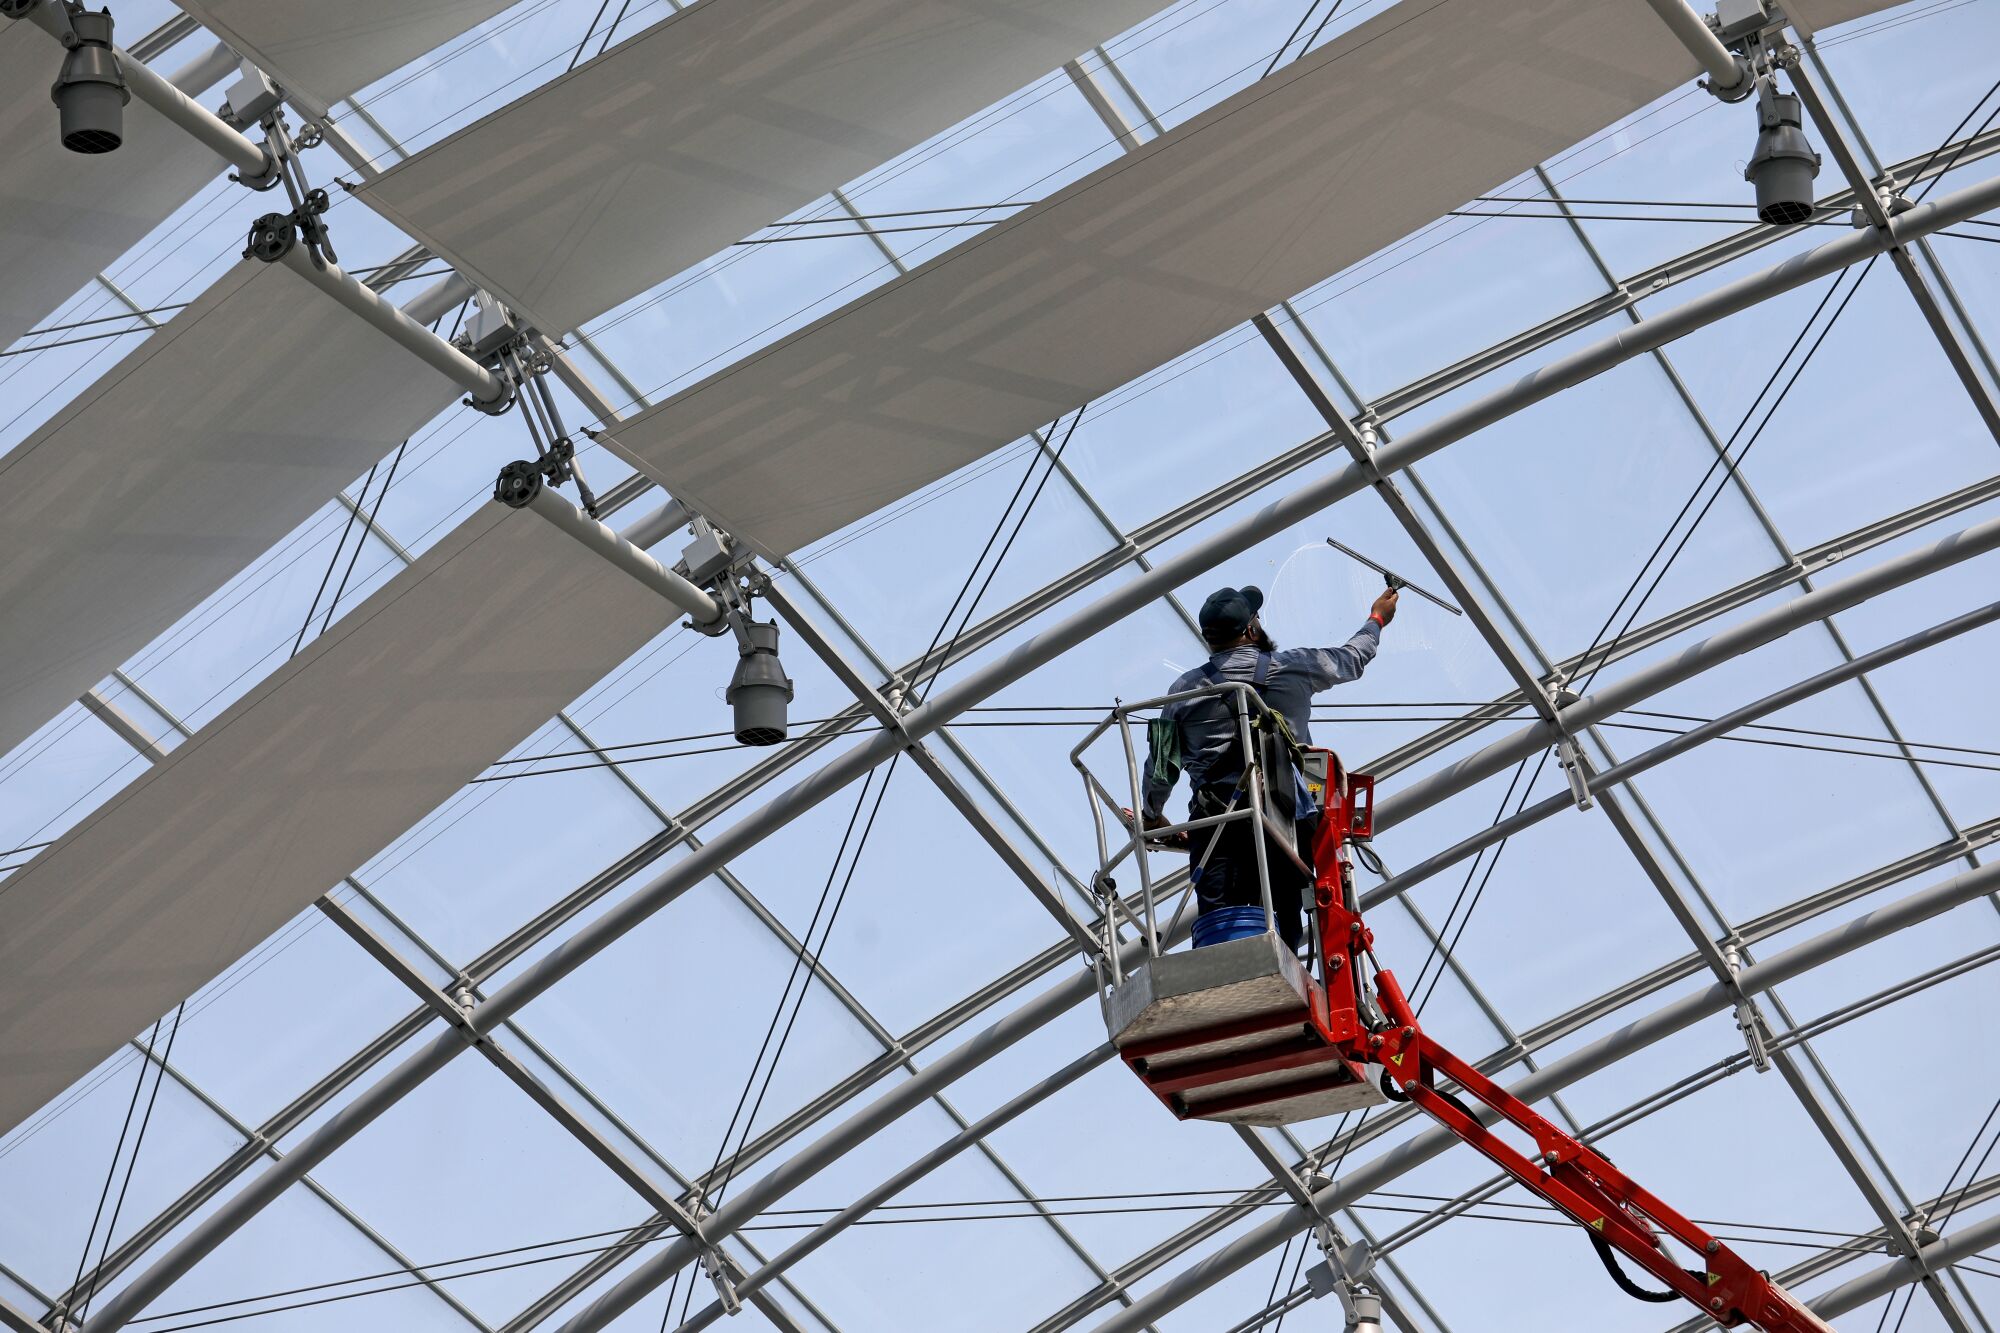 Jaime Vazquez, maintenance, cleans the glass dome covering the Dolby Family Terrace on the sphere